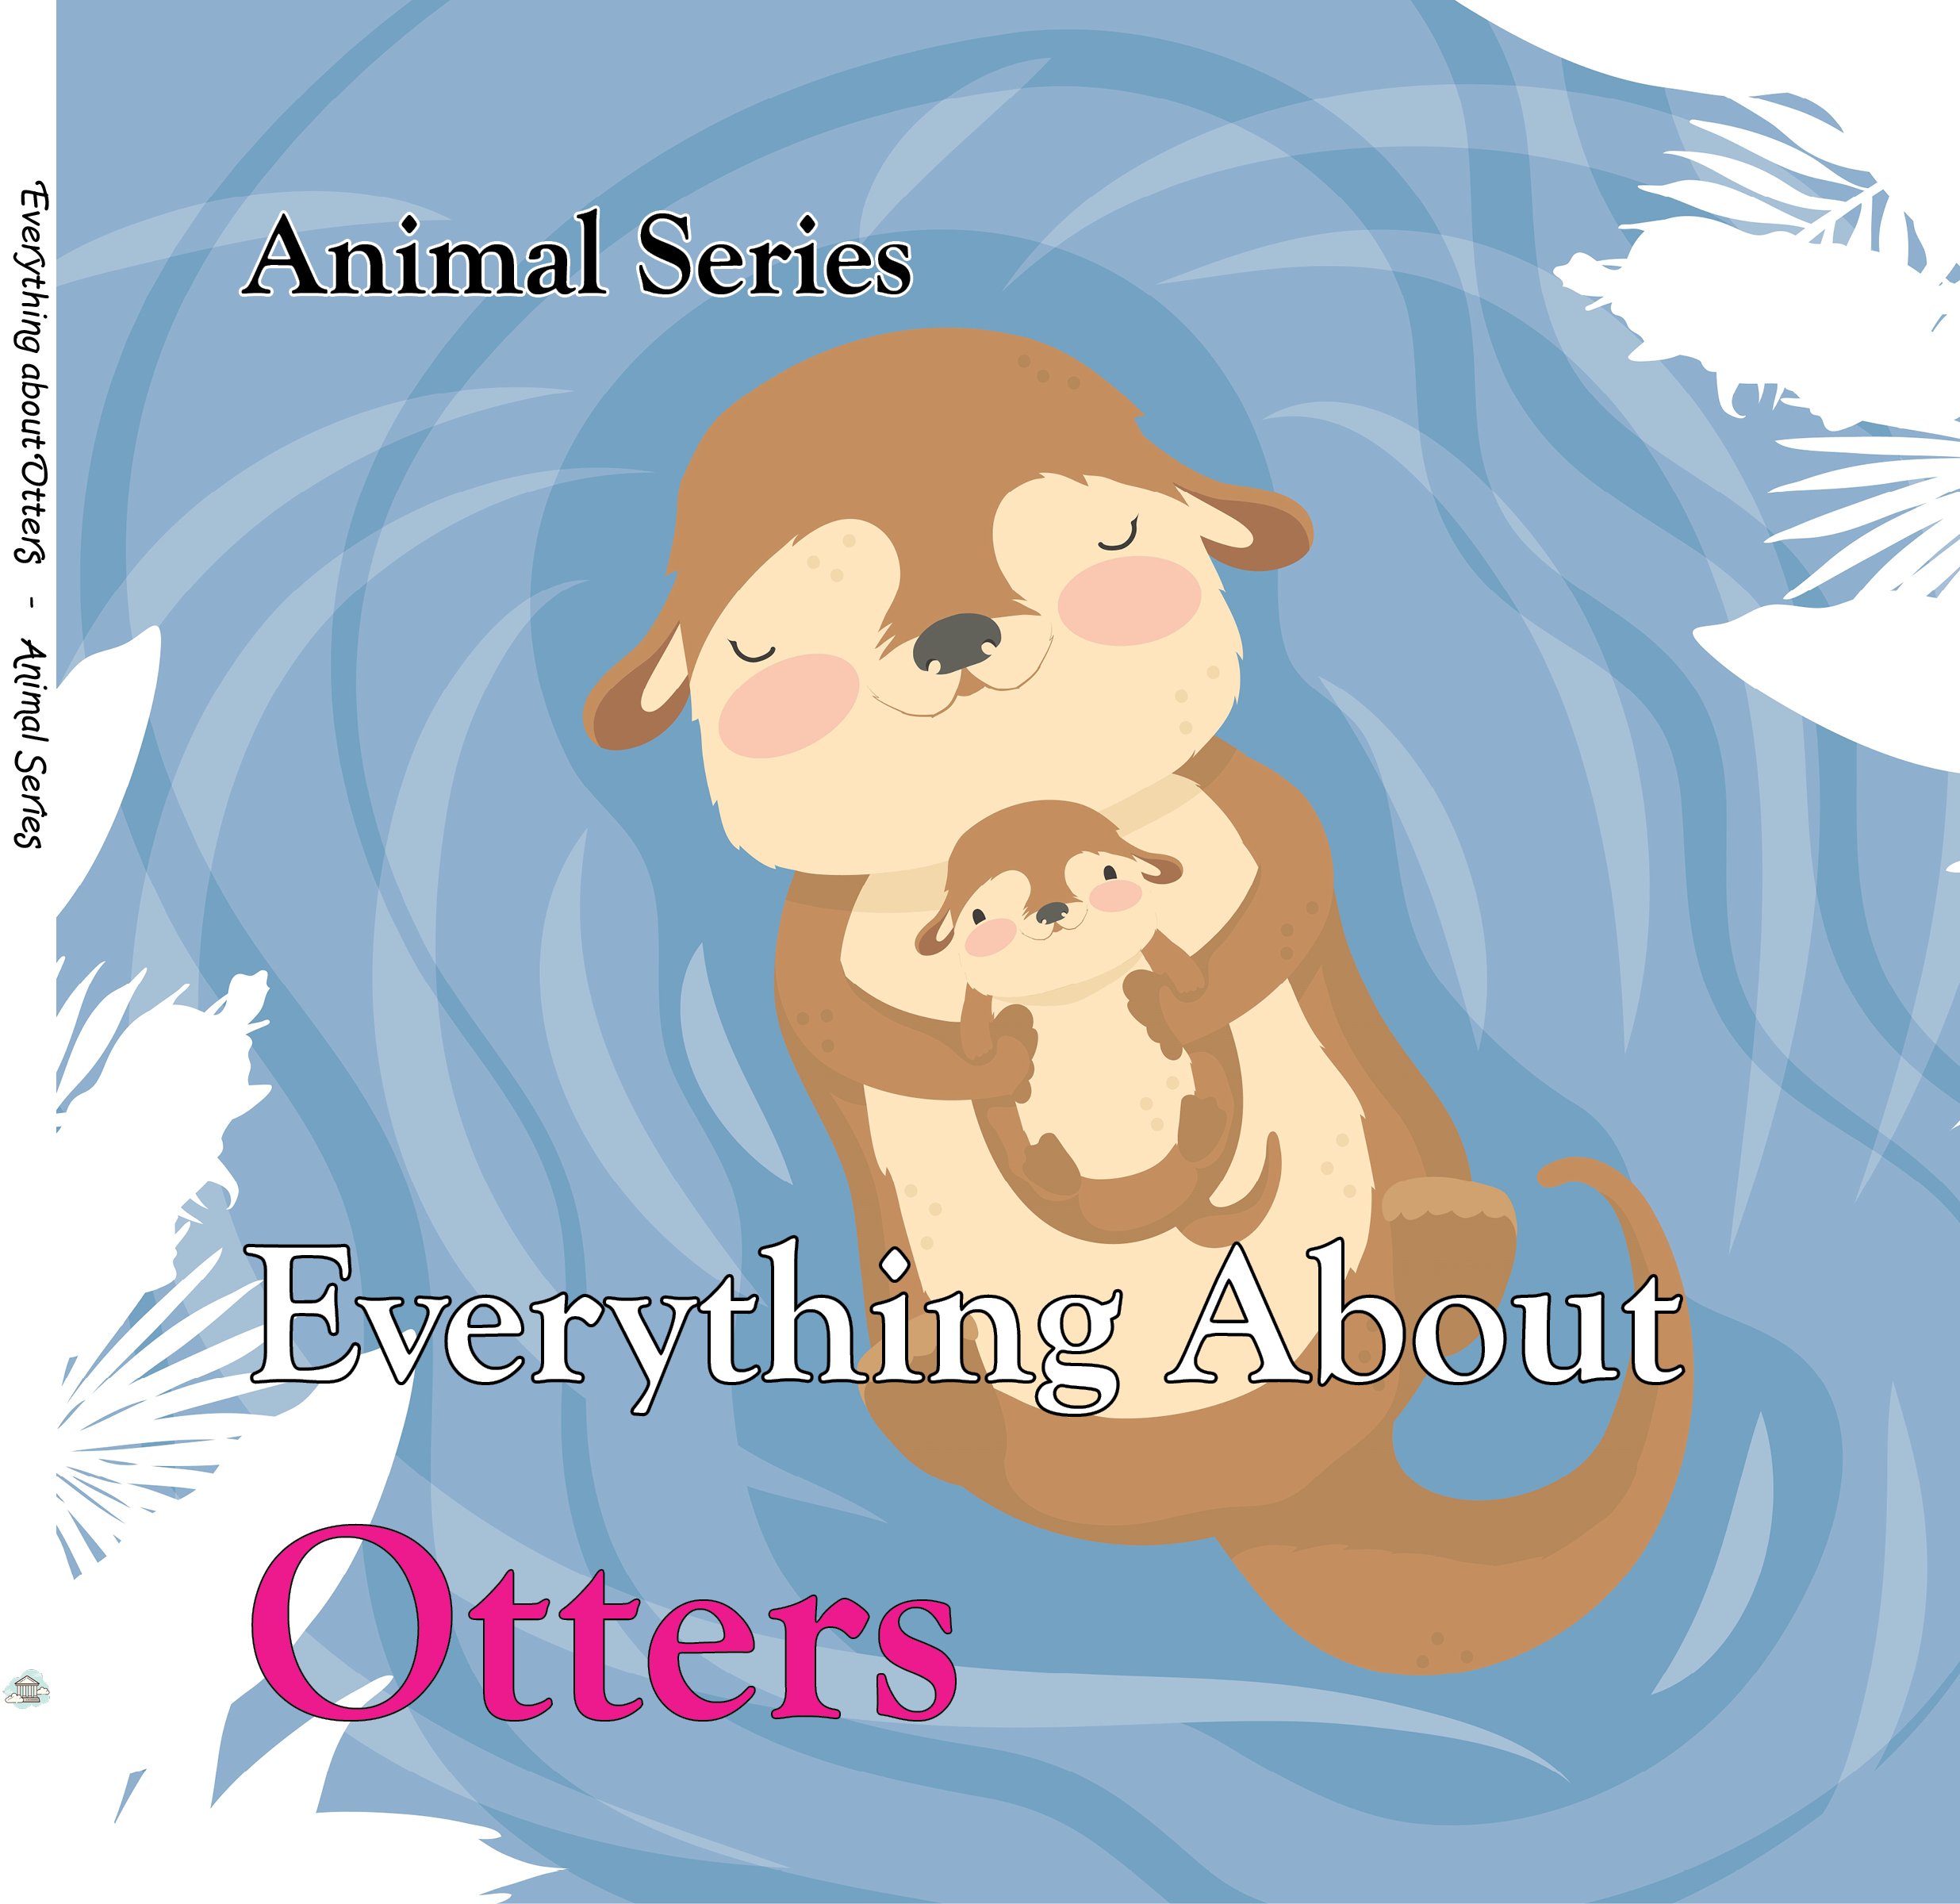 Everything about Otters - Animal Series.jpg